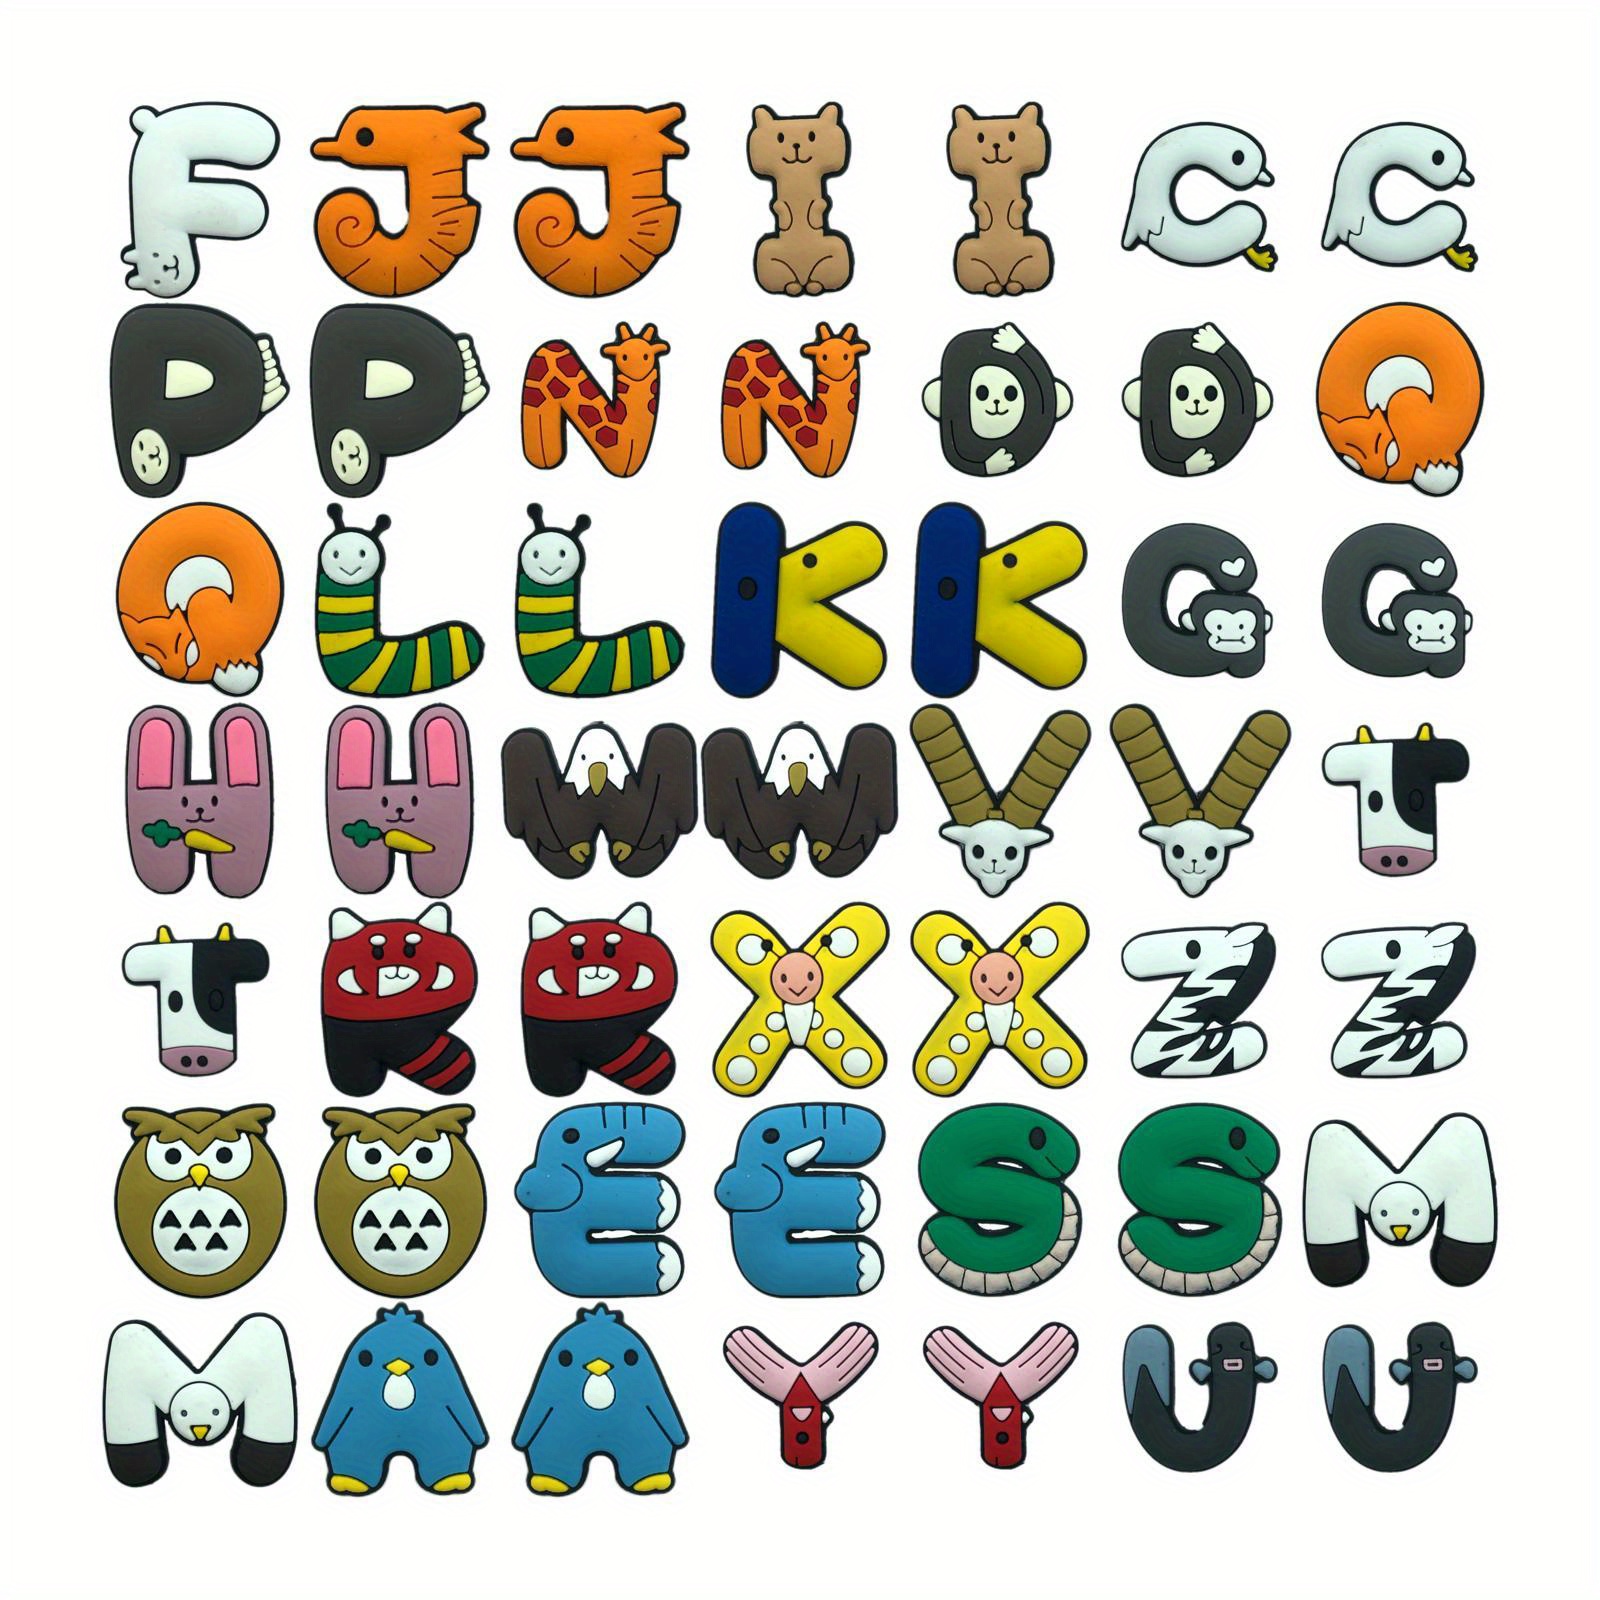 25,30 Different Shoe Charms for Kids Boys Girls,Texas/Axolotl/Letter Shoe Charms for Teens Women Man,Cartoon Houston Cute Animal Alphabet Shoes